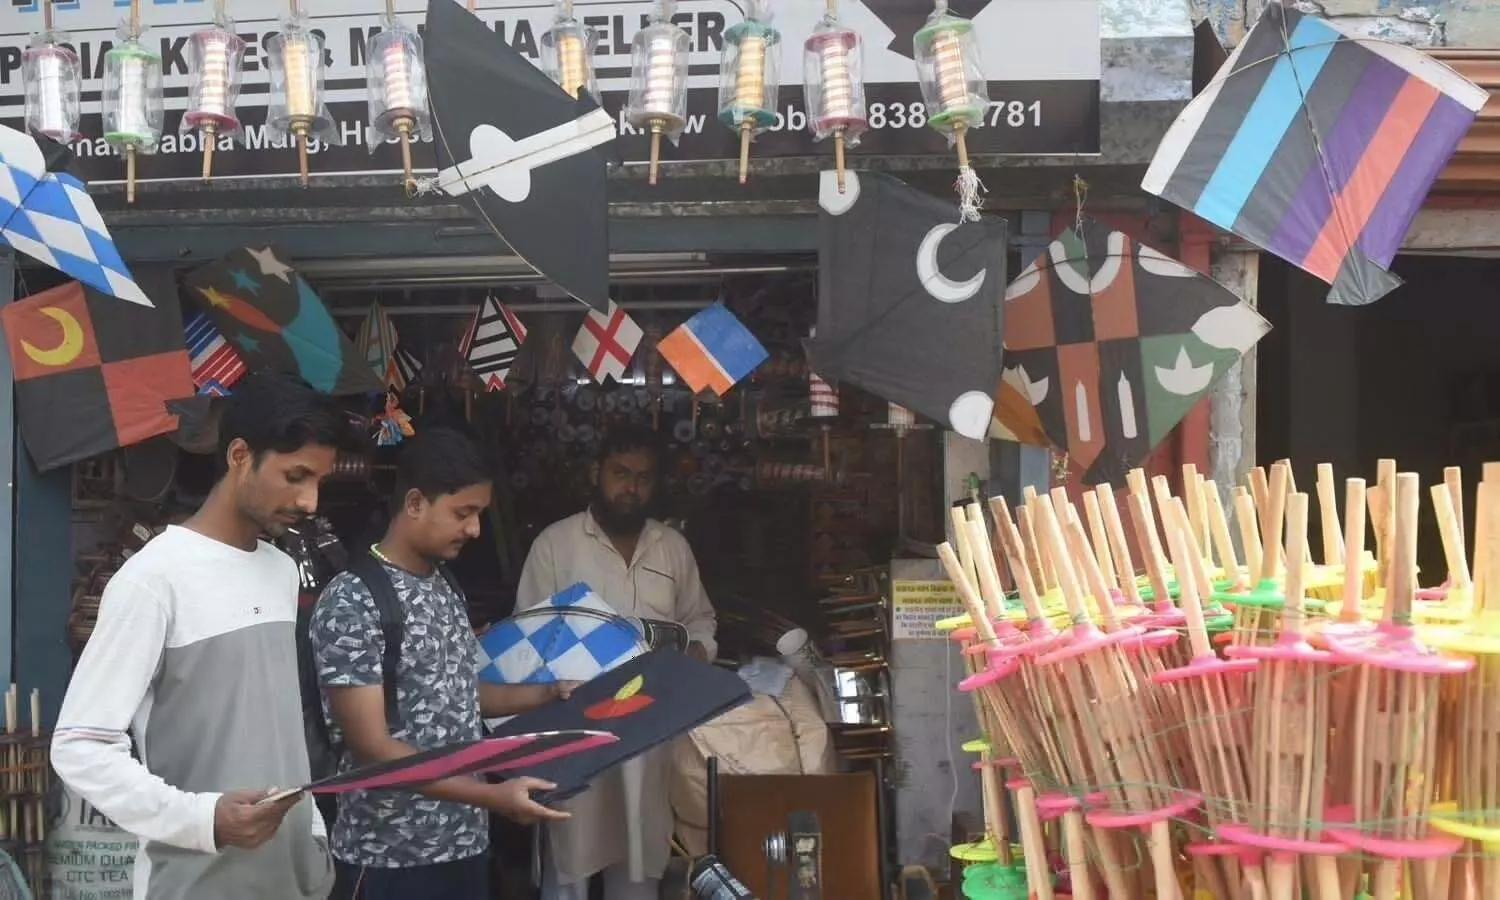 On the second day of Diwali, there seems to be a gathering, today we will fight a lot, there will be a crowd at kite shops